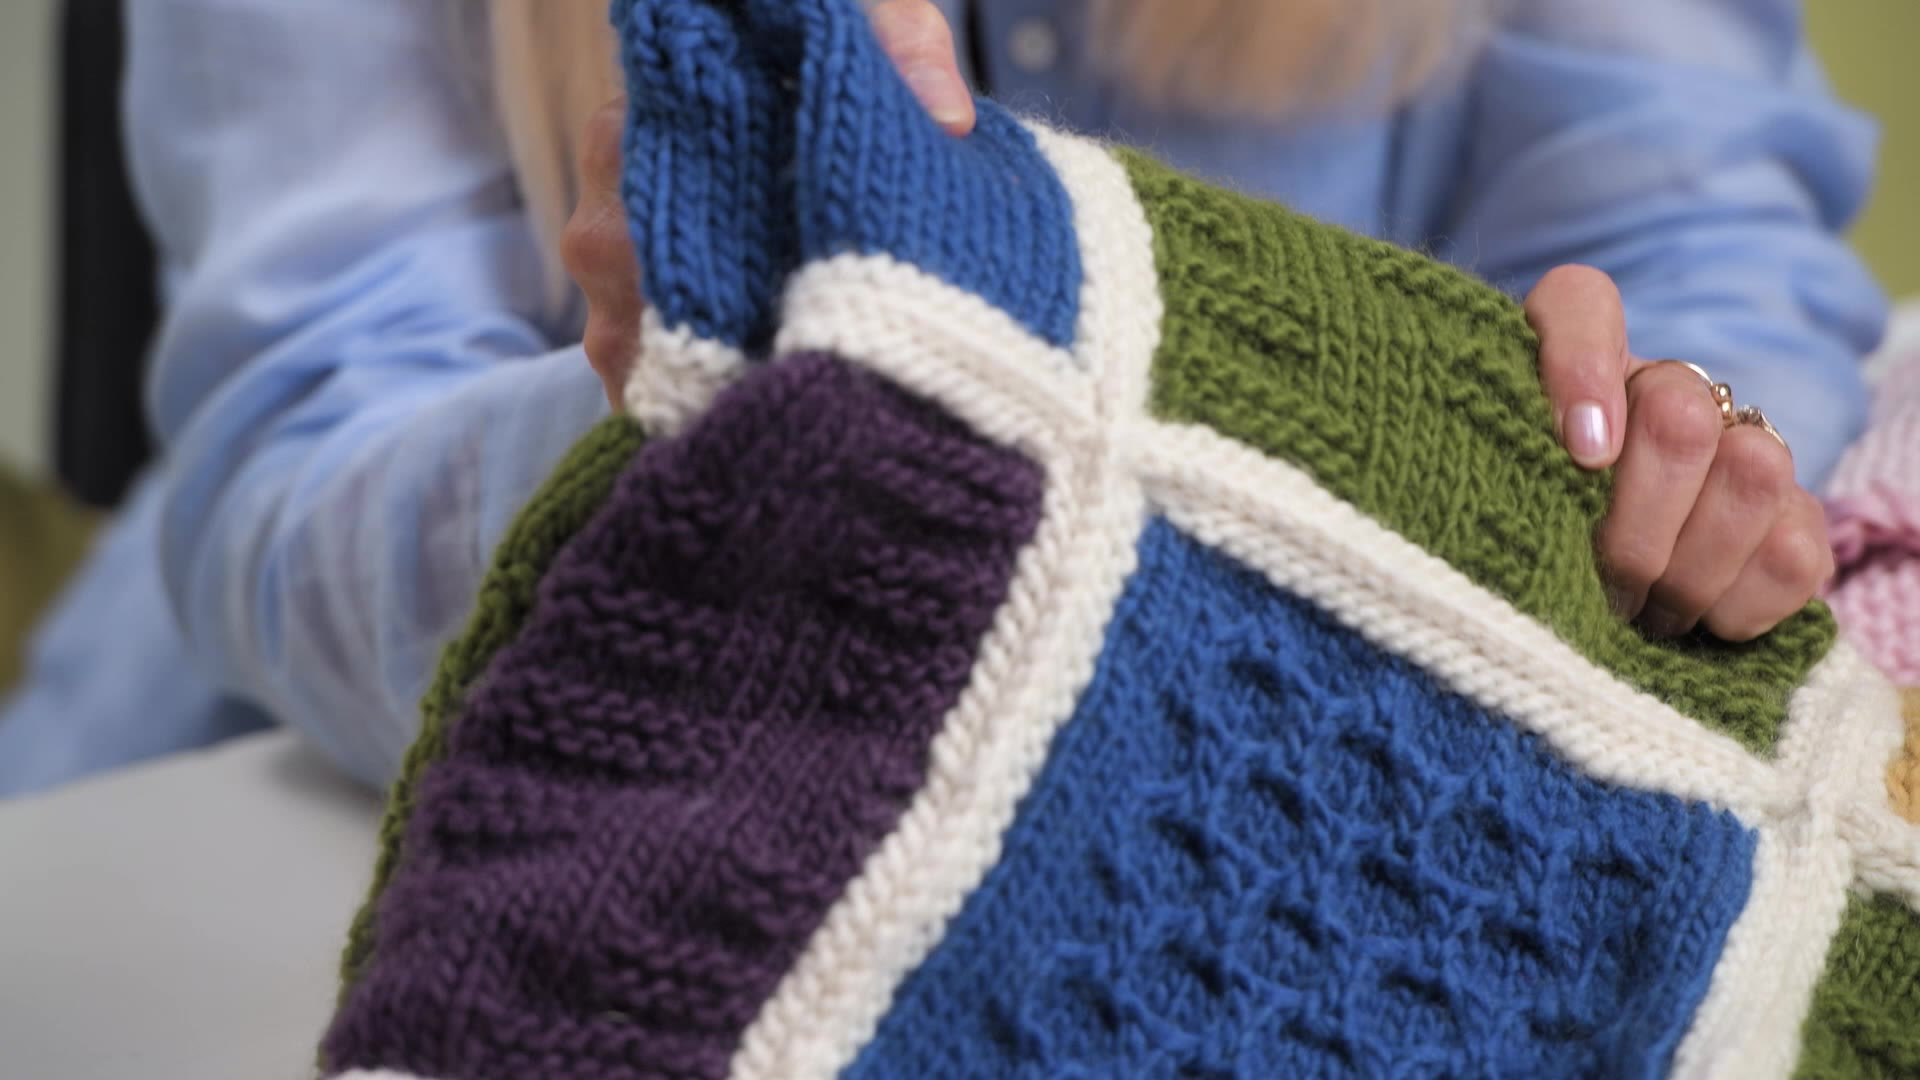 How To Knit a Chunky Blanket